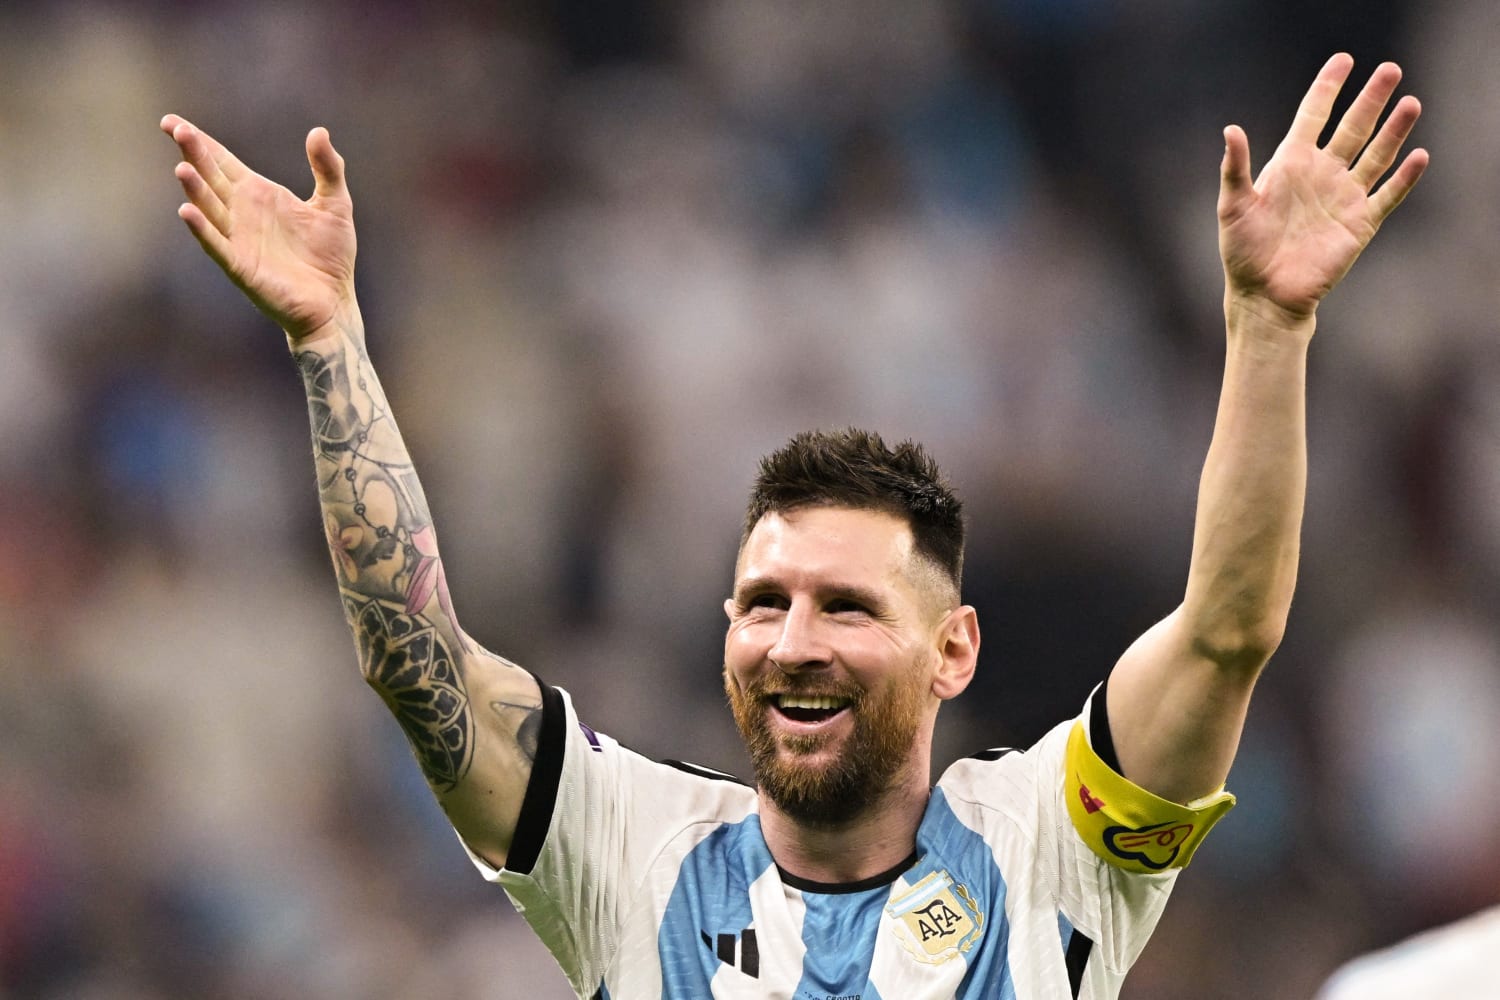 Argentina celebrates team reaching World Cup final led by Lionel Messi